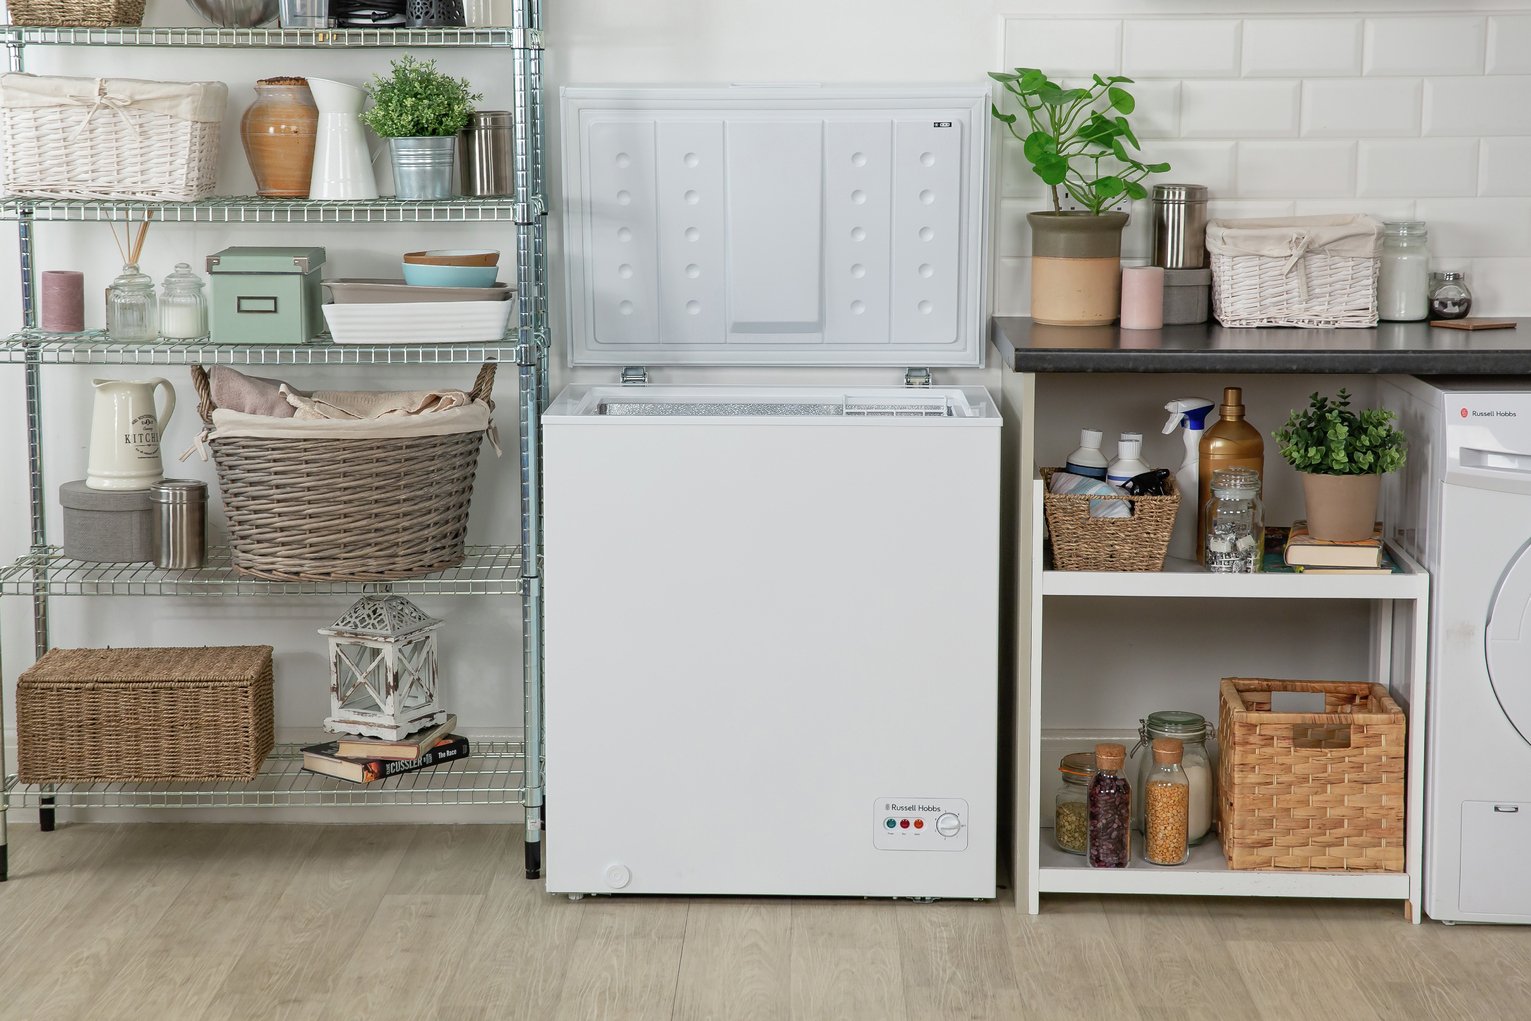 Russell Hobbs RHCF150 Chest Freezer Review